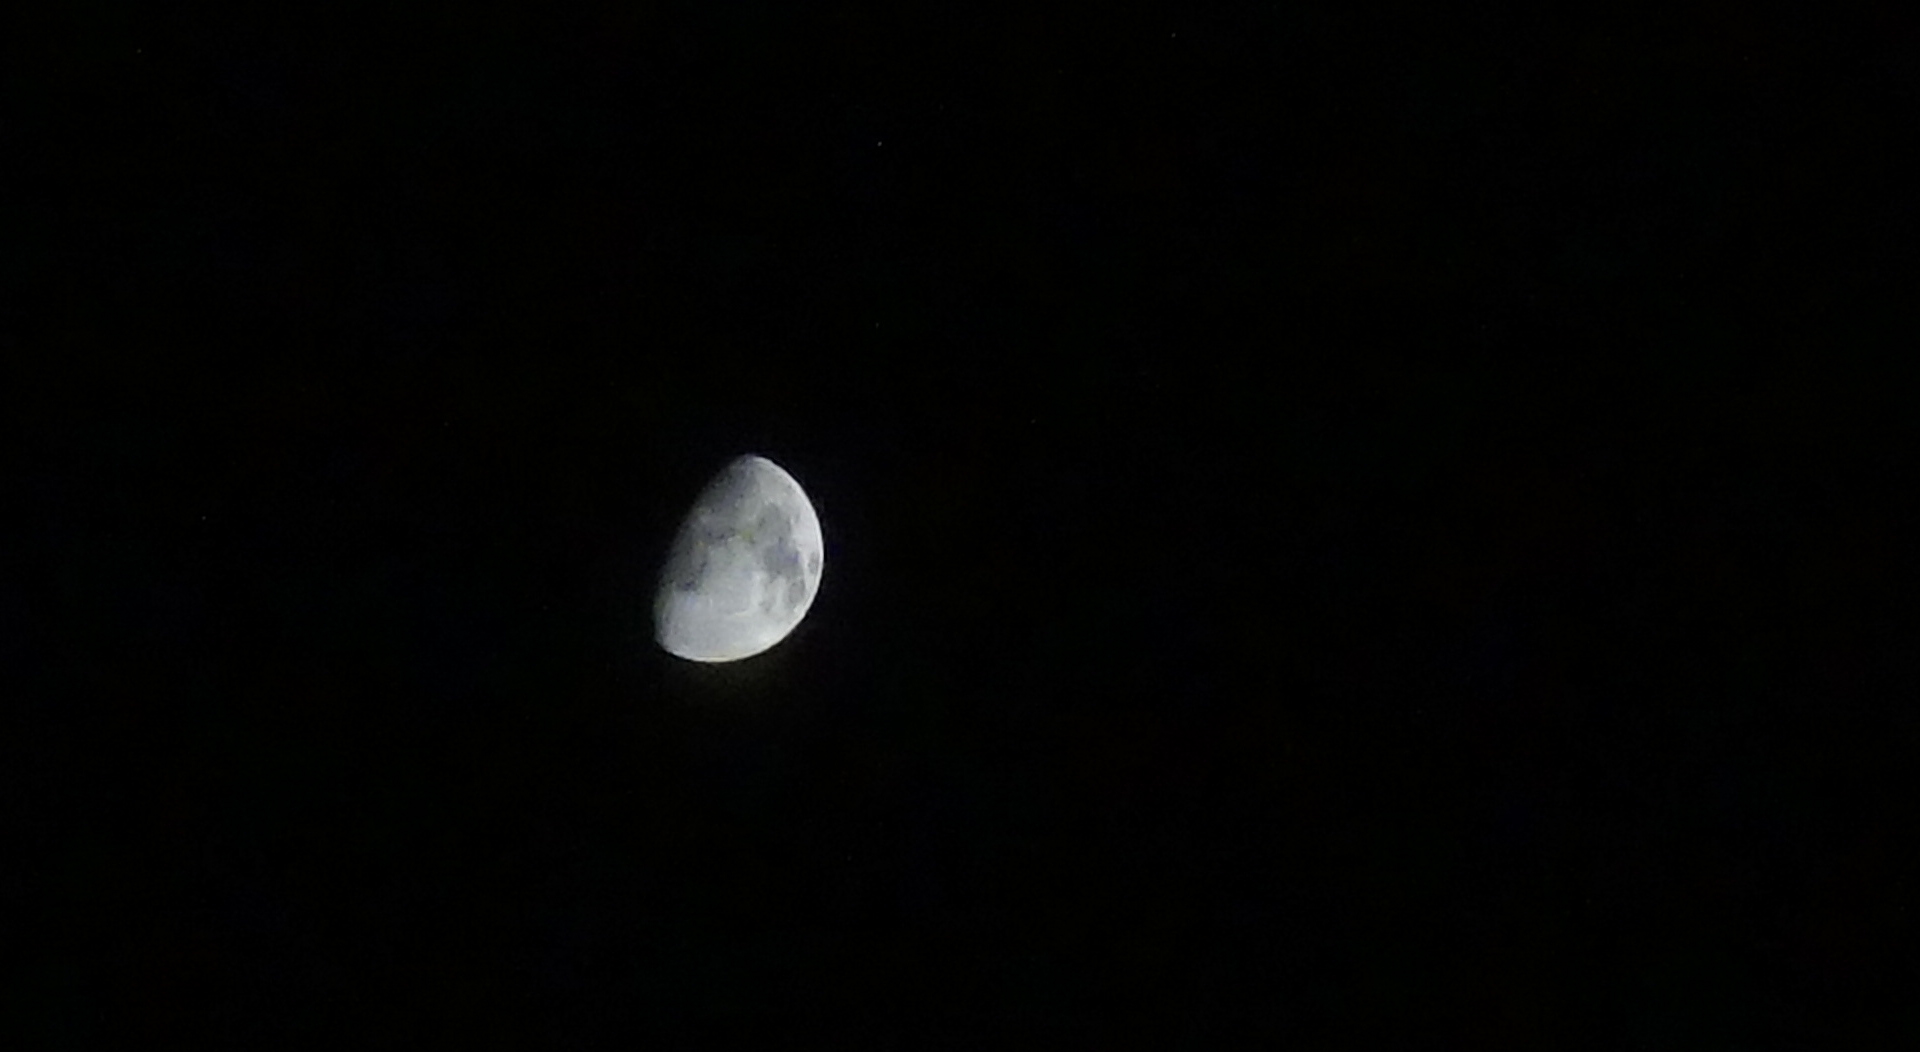 First moon photo cropped 8-7-2014